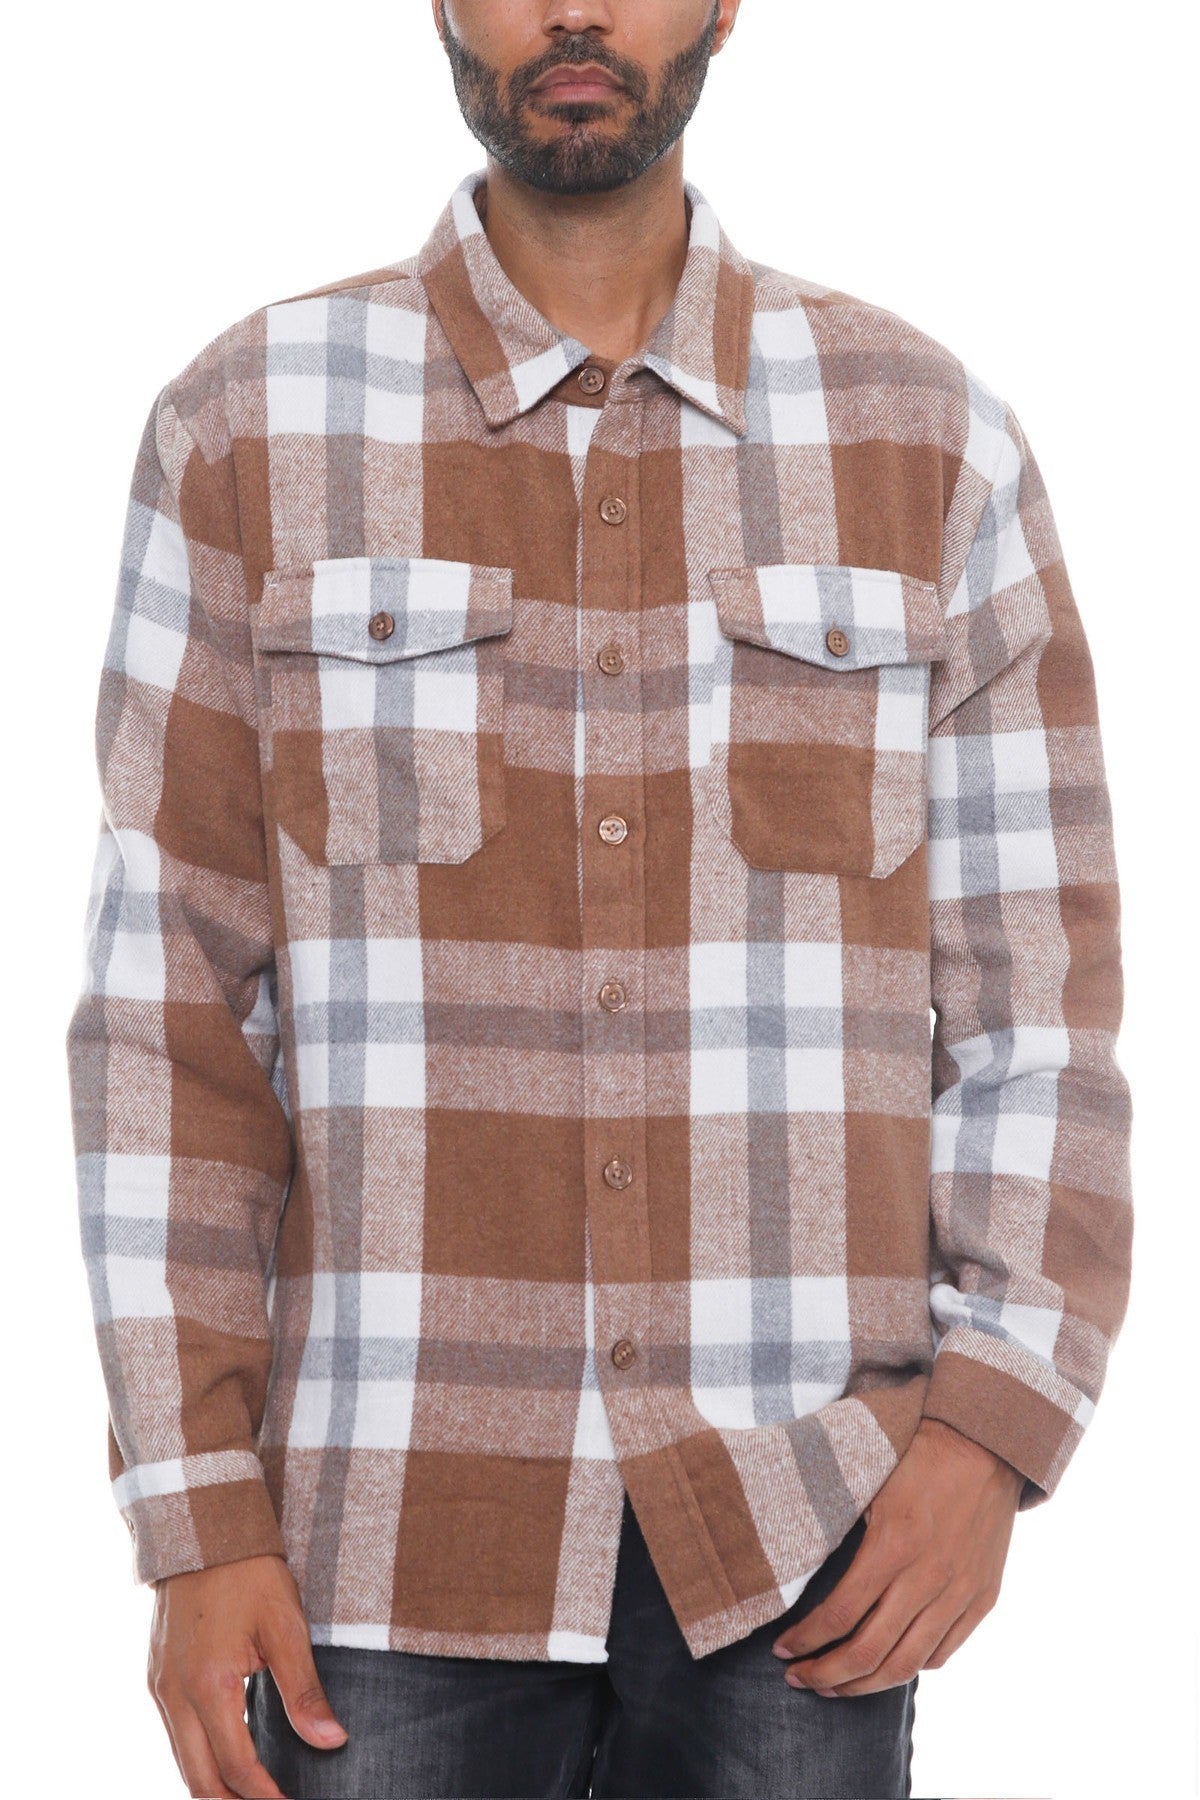 Mocha/Grey Men's Checkered Soft Flannel Shacket - 8 colors - men's button-up shirt at TFC&H Co.